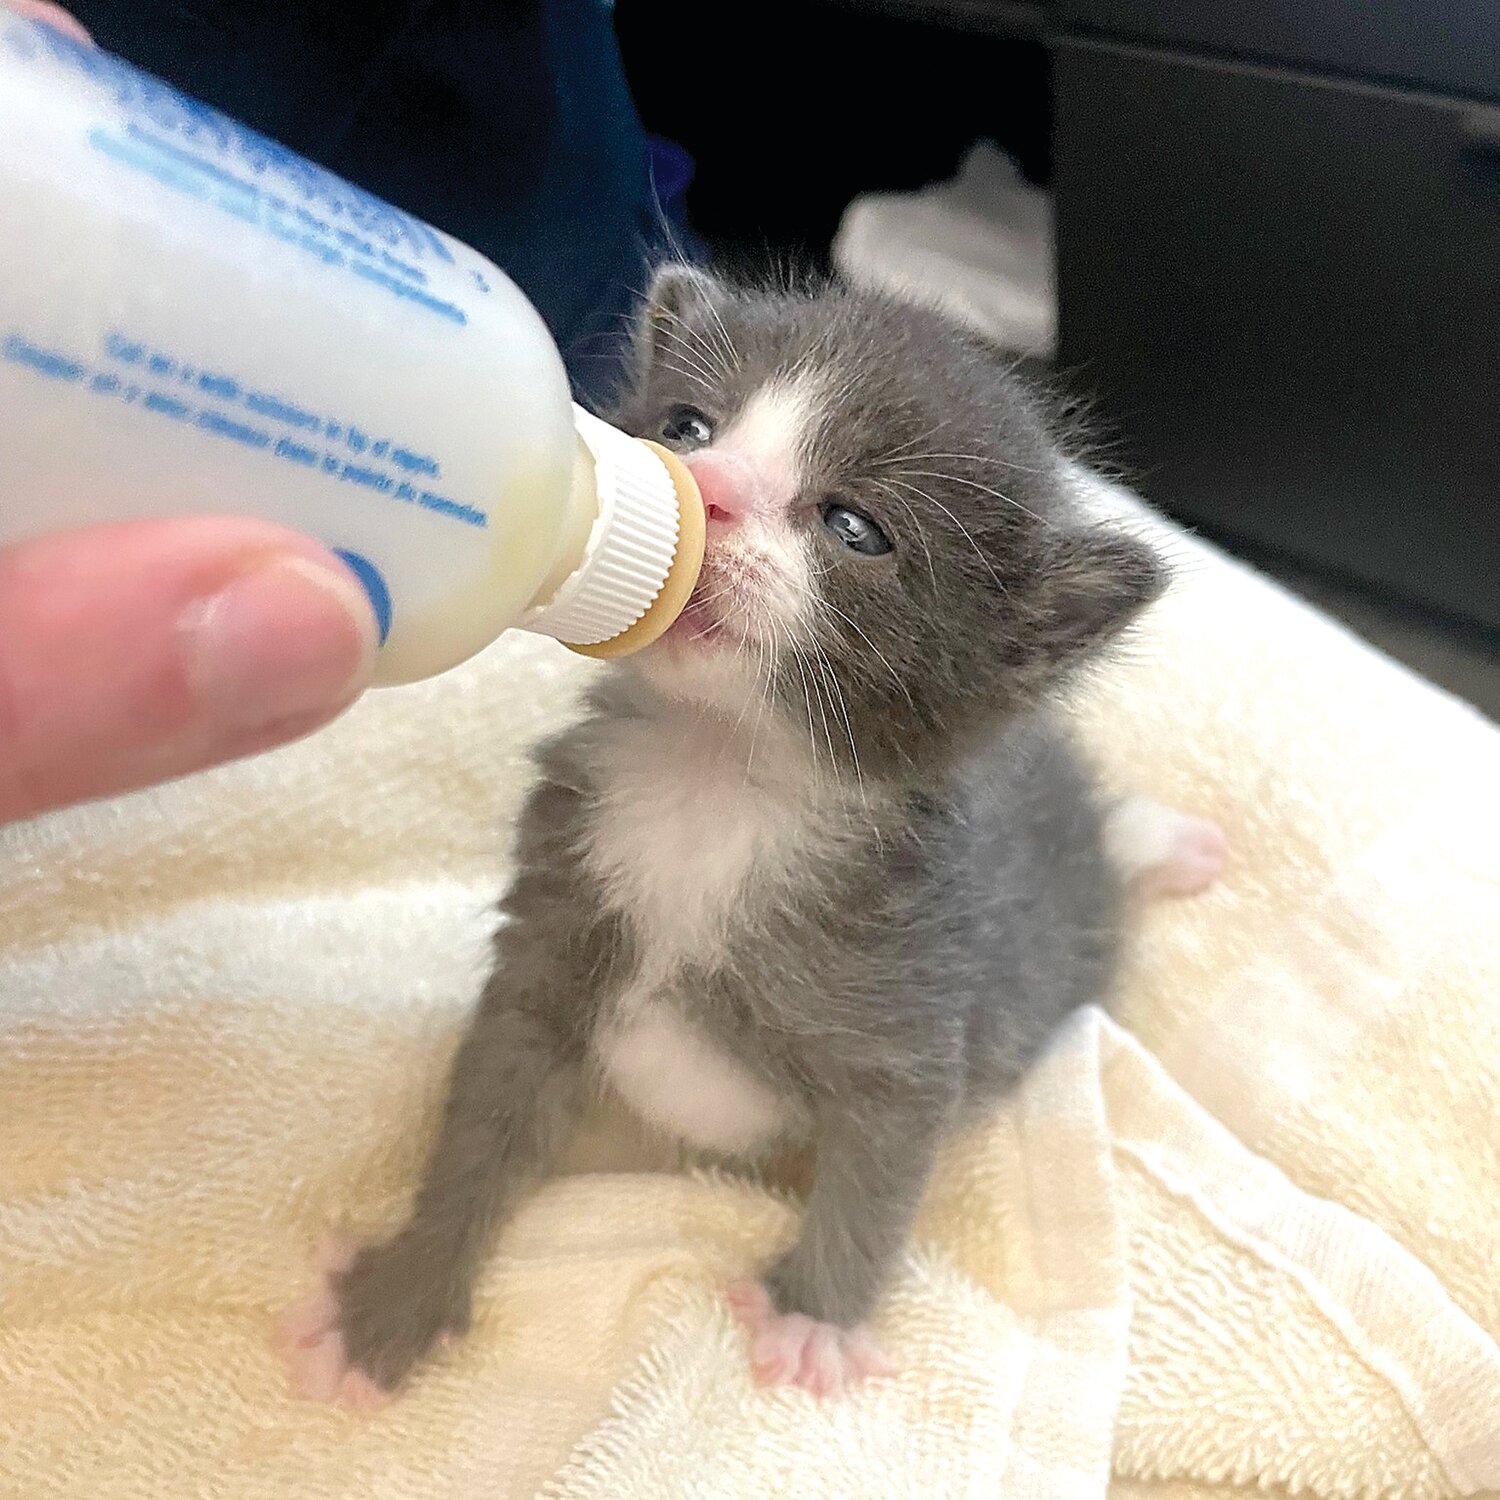 Women’s Animal Center needs foster volunteers to help with caring for kittens until they are ready to be adopted.